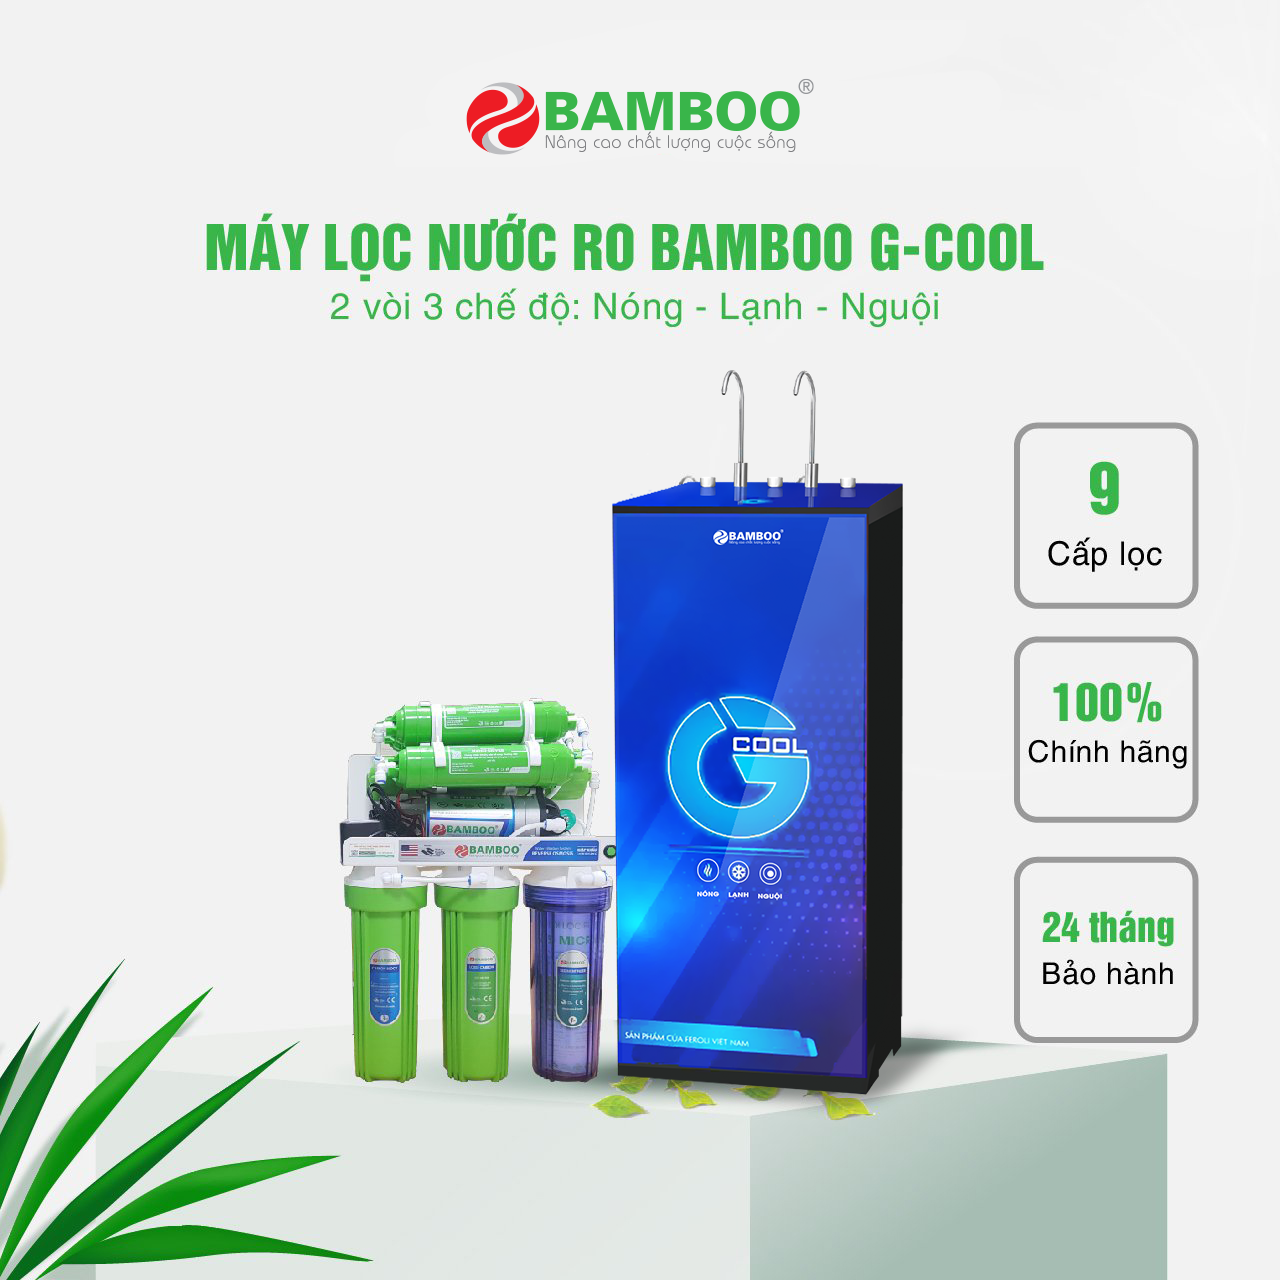 Bamboo G-Cool